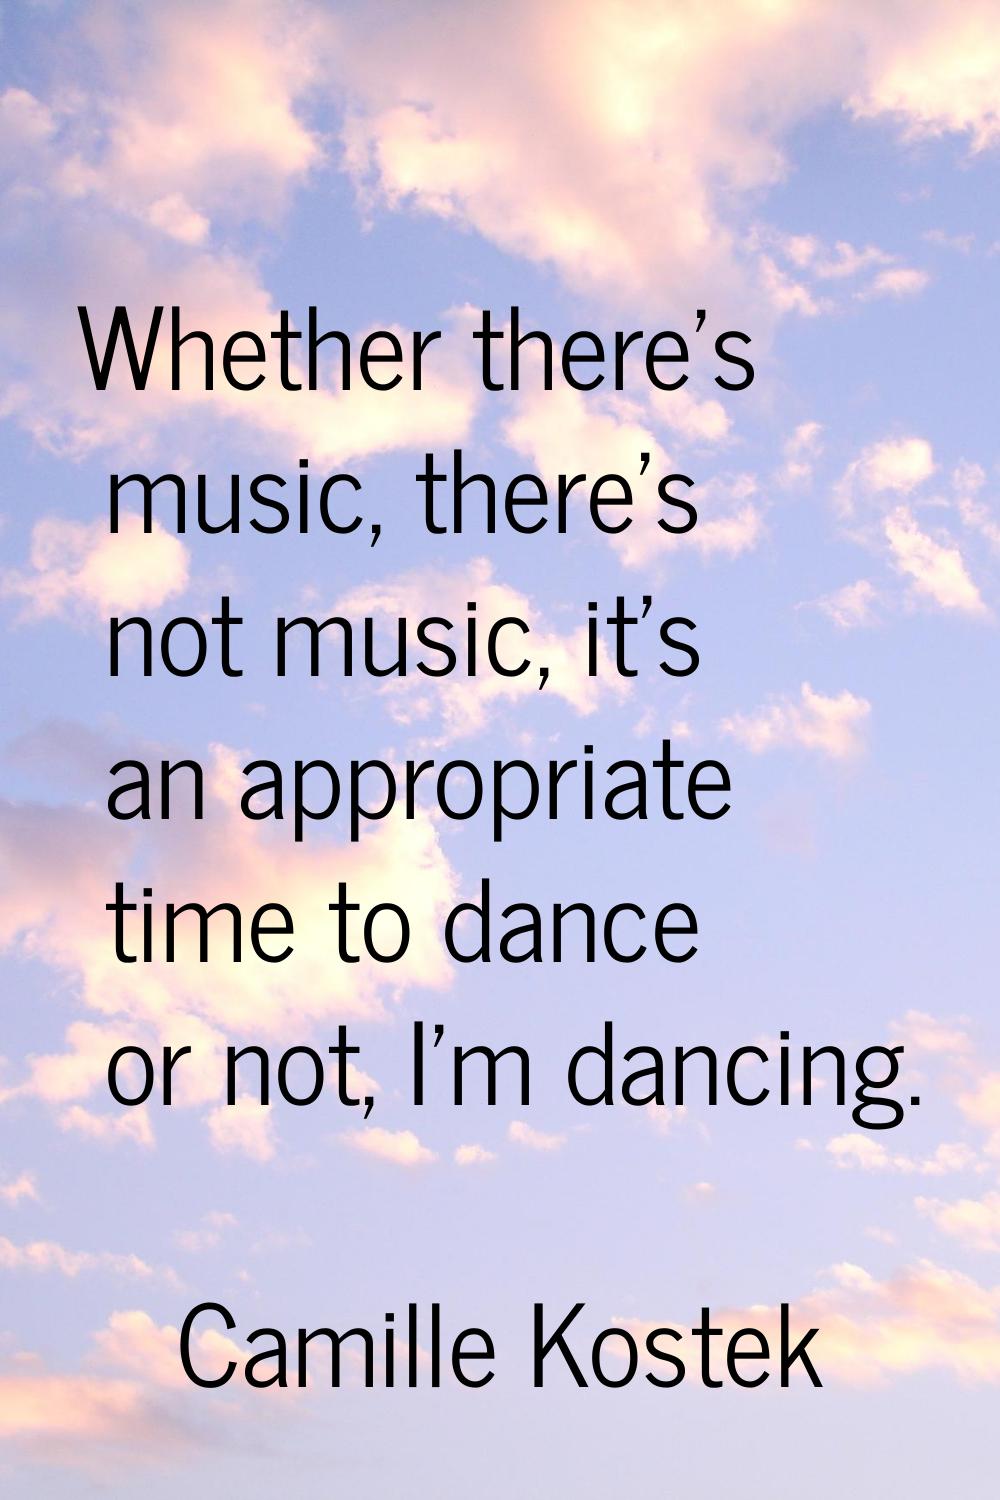 Whether there's music, there's not music, it's an appropriate time to dance or not, I'm dancing.